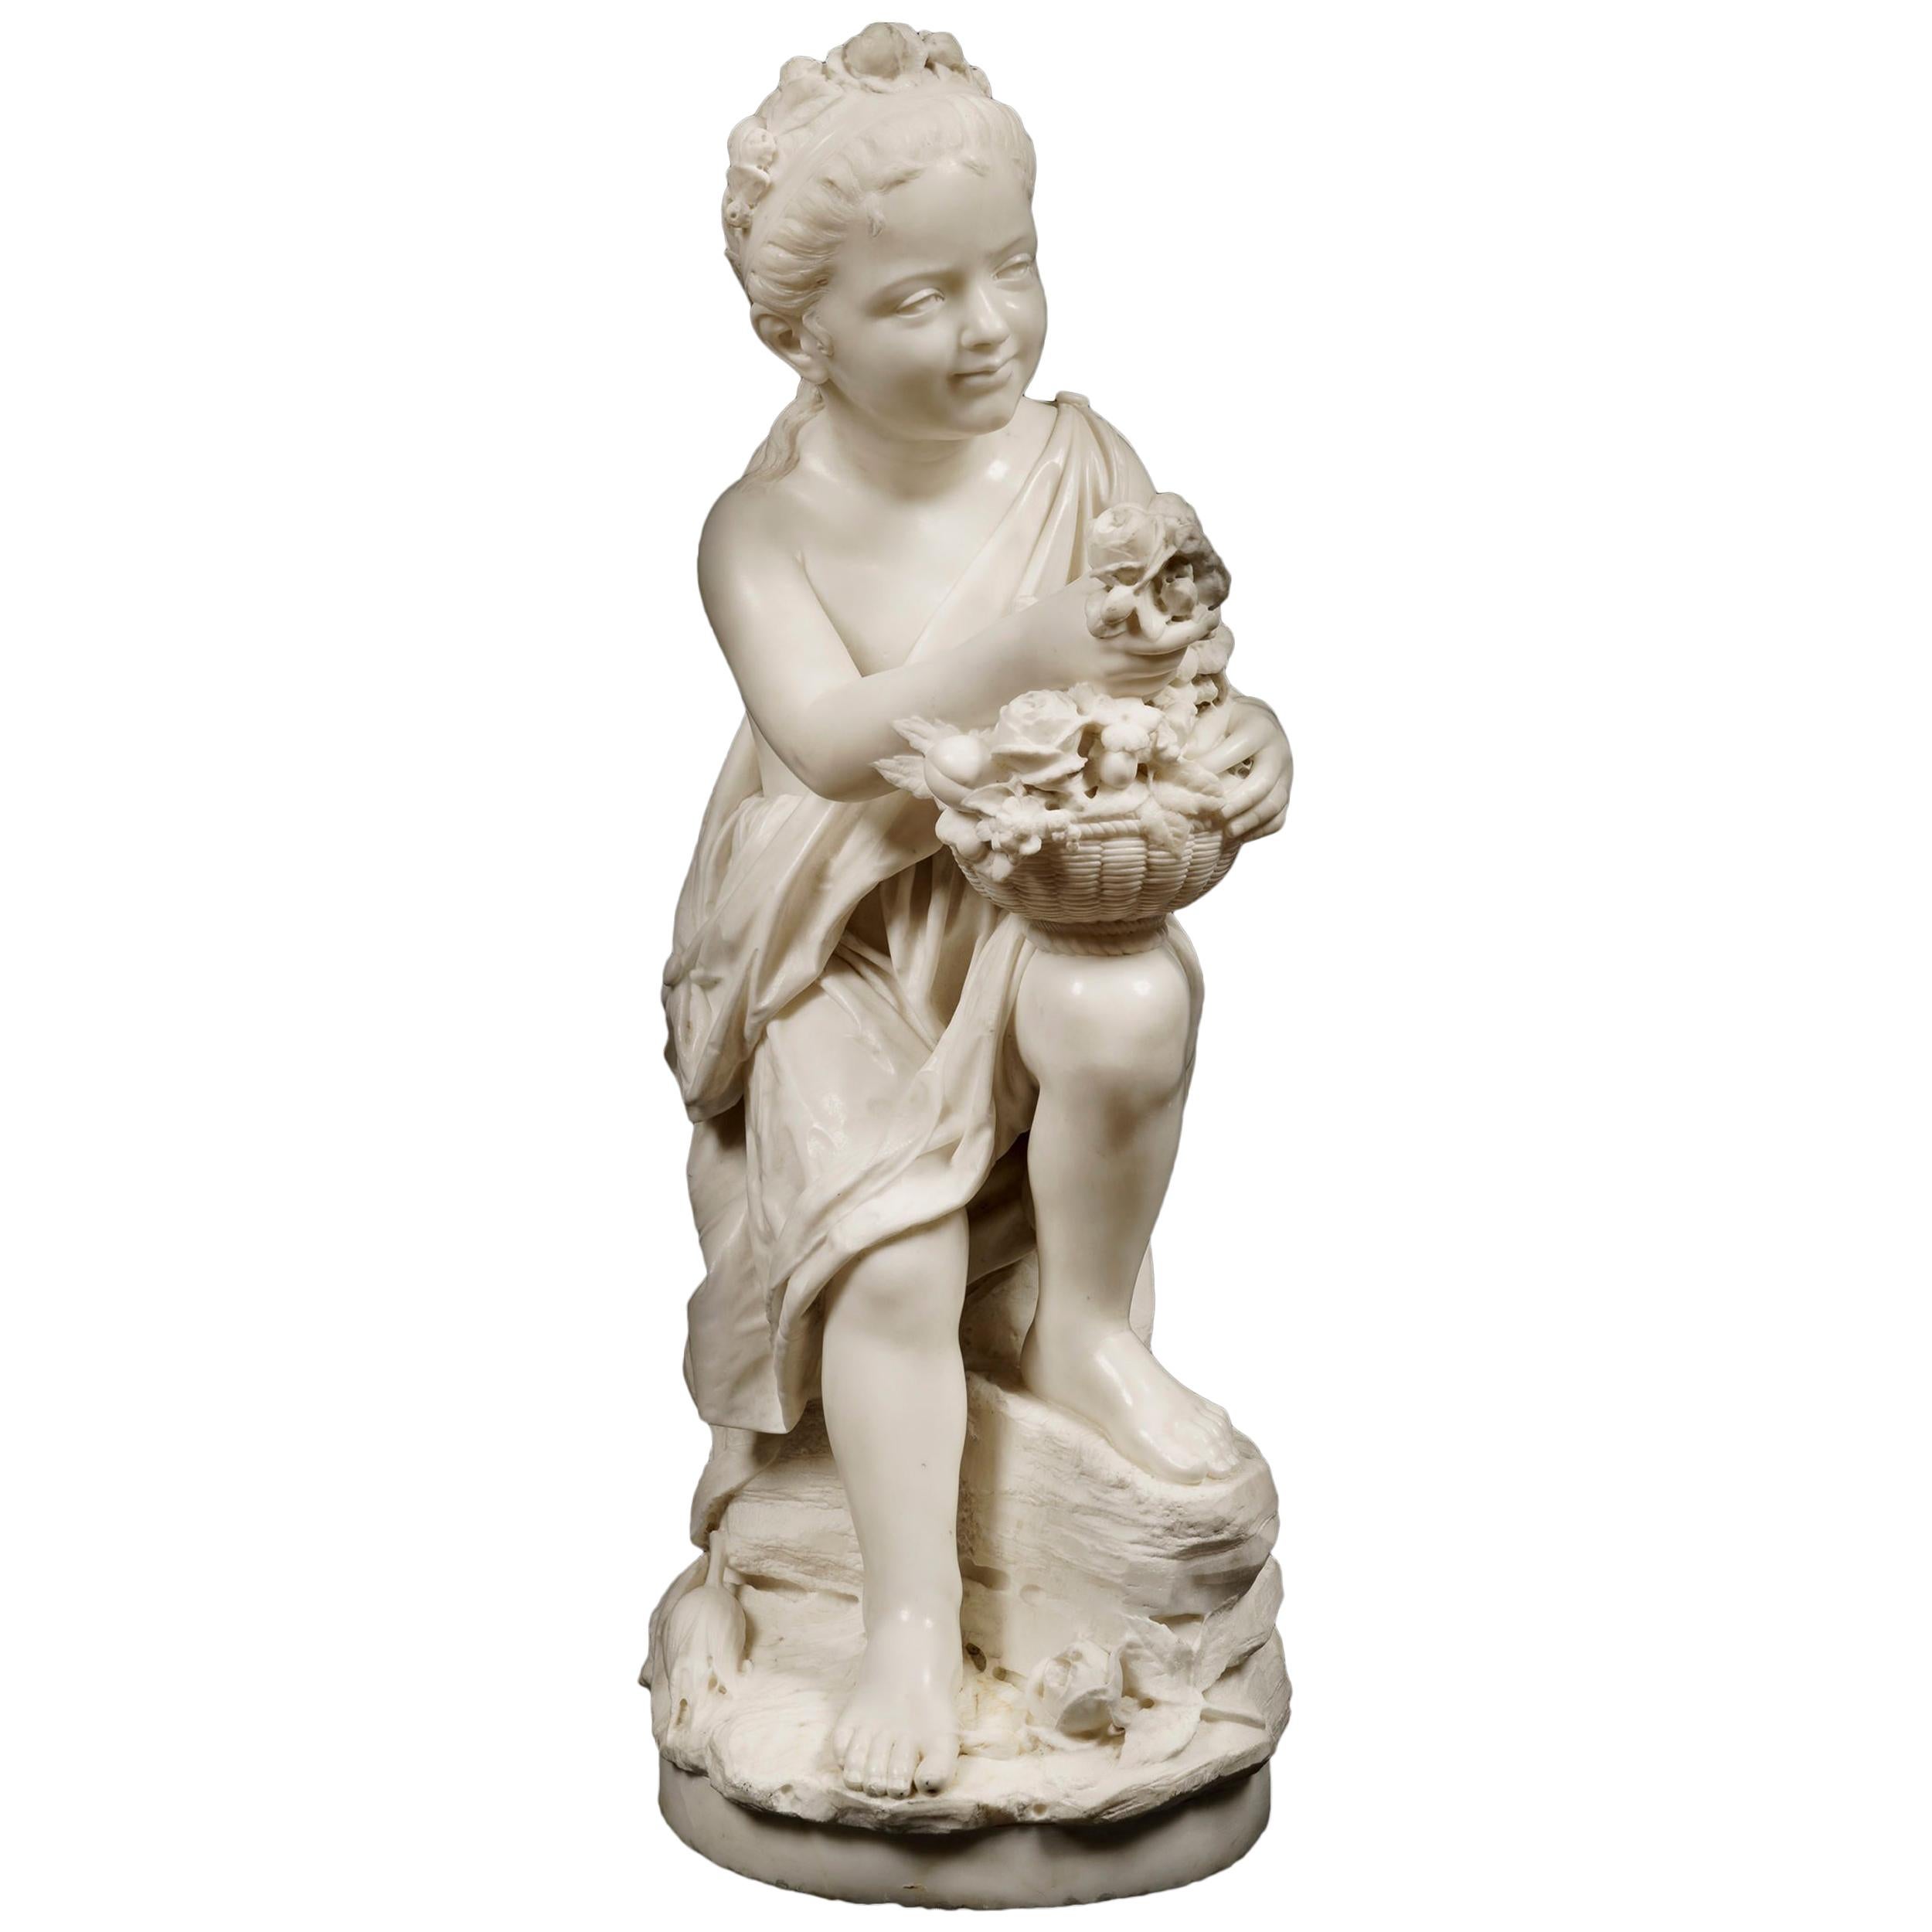 Carved White Marble Figure of a Flower Girl Signed to the Base 'Monti'